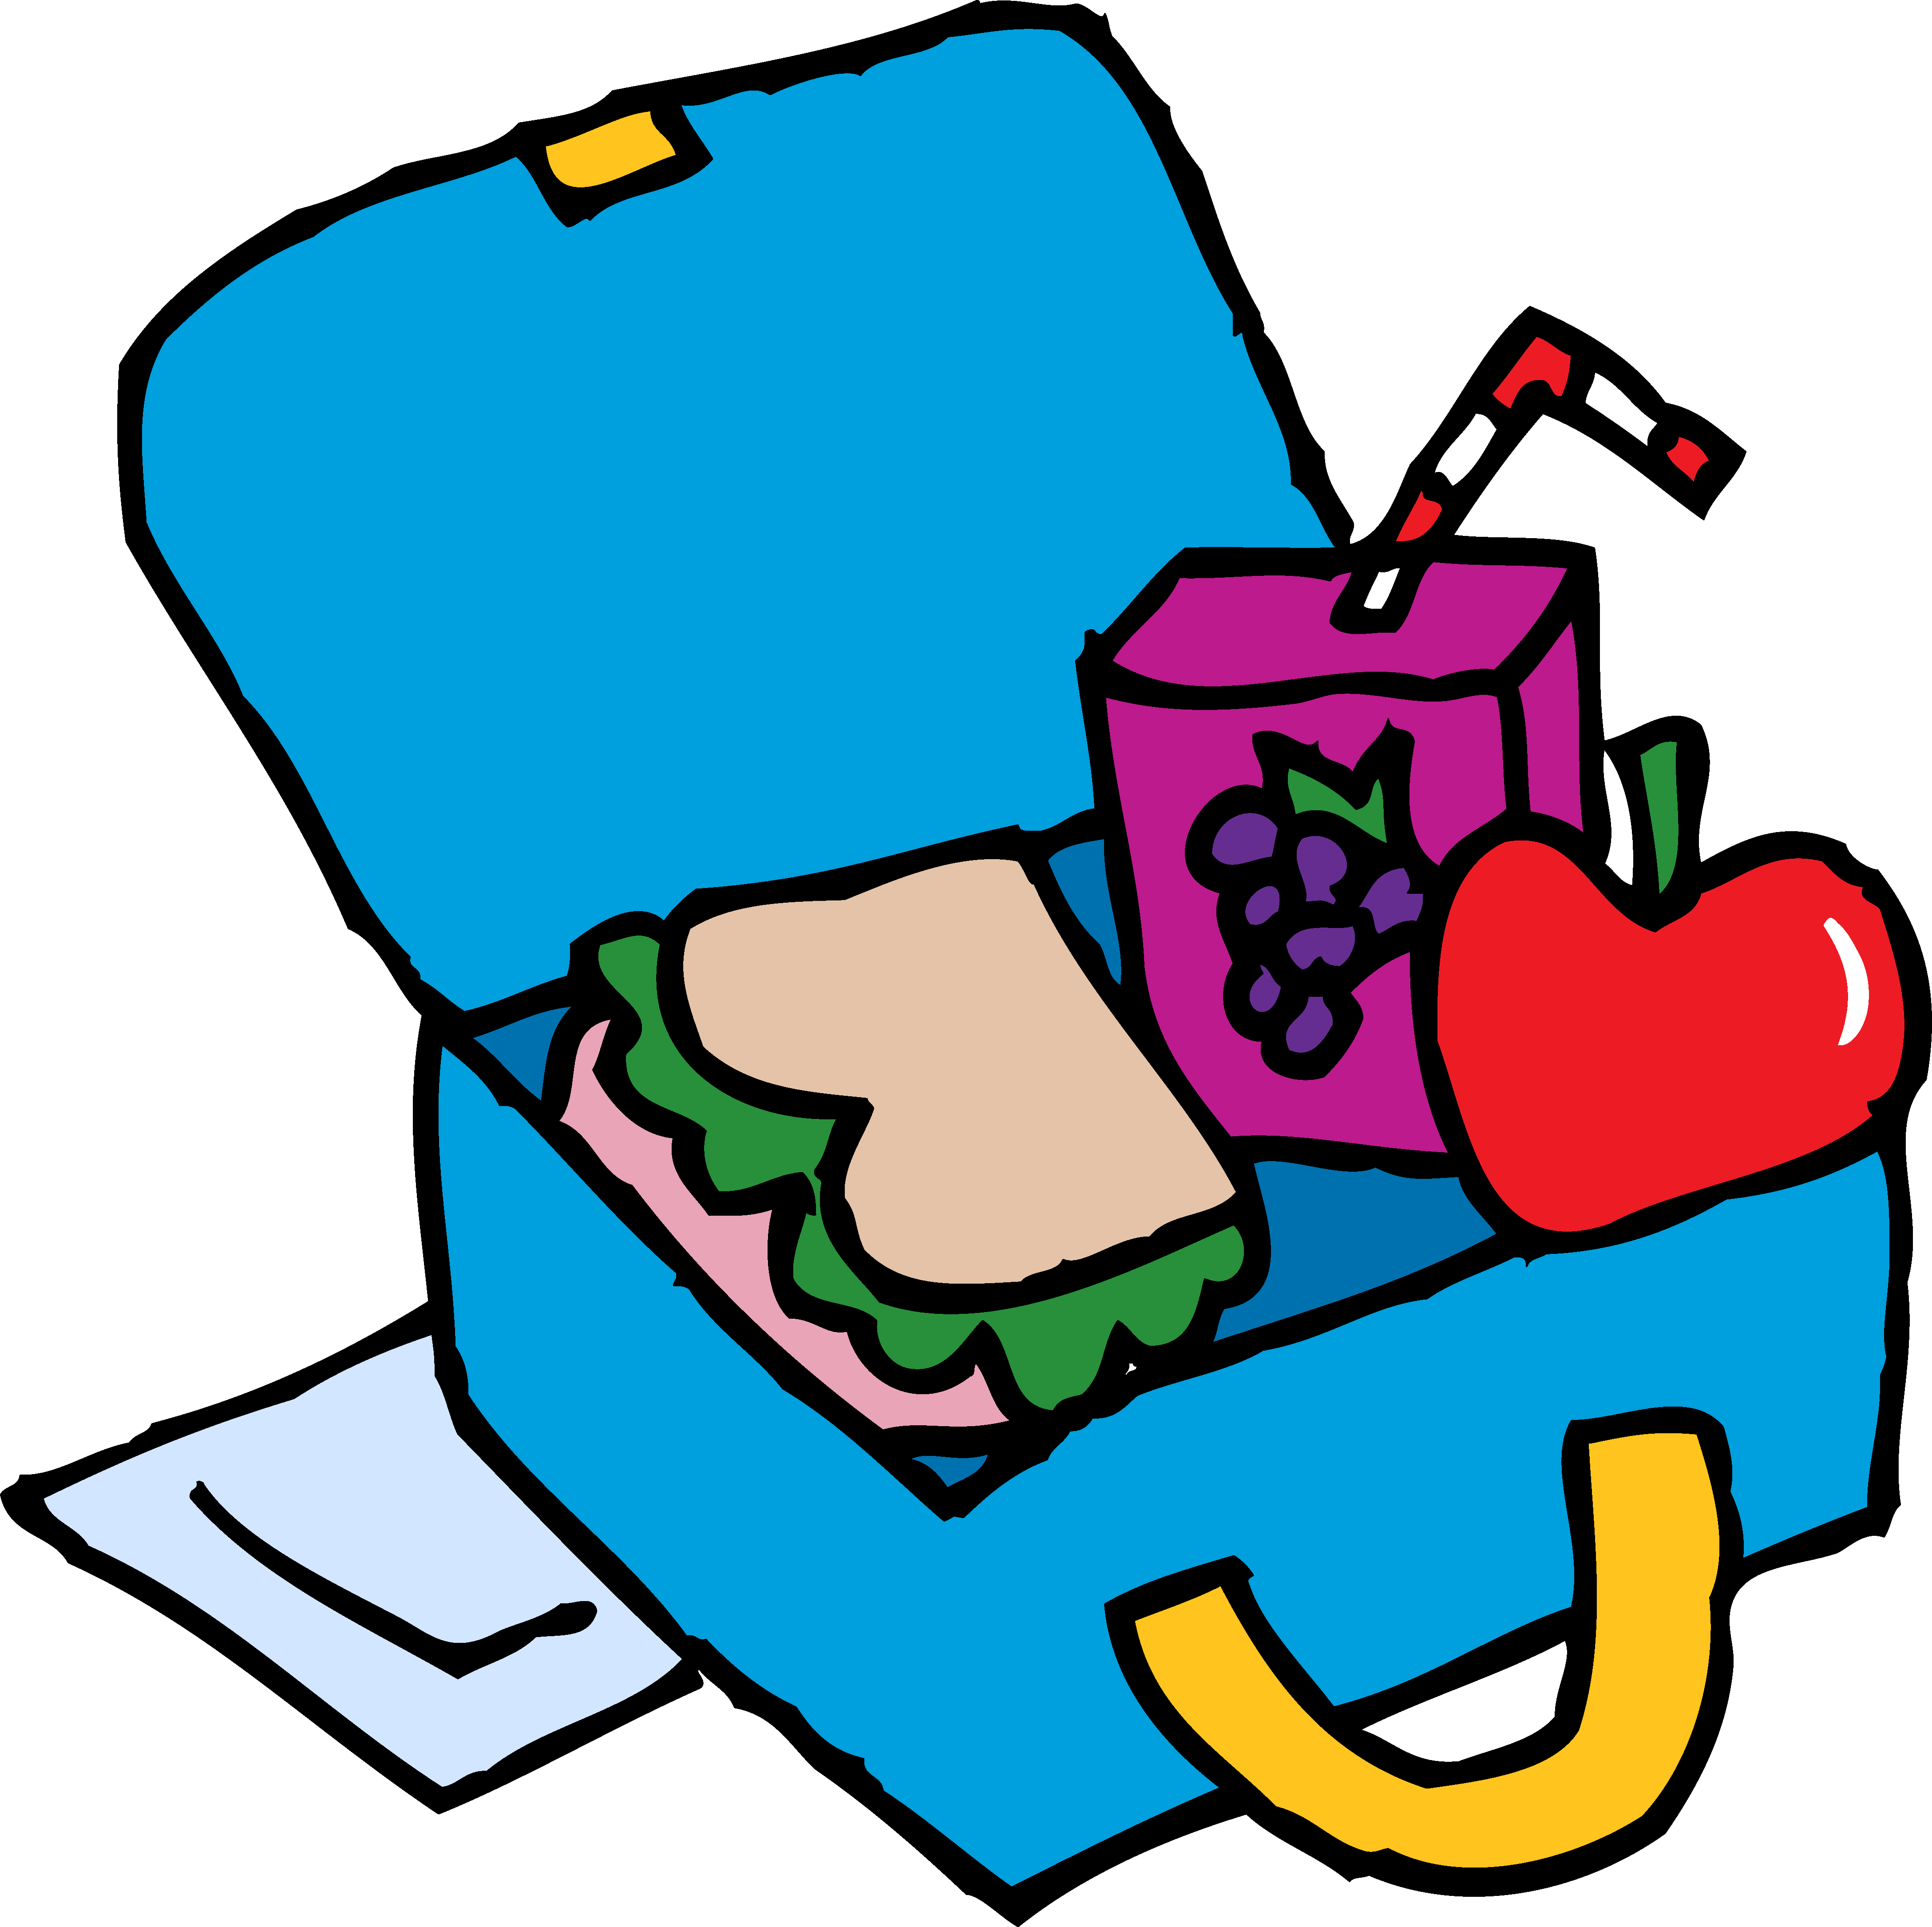 Lunch box lunch clipart free download clip art on